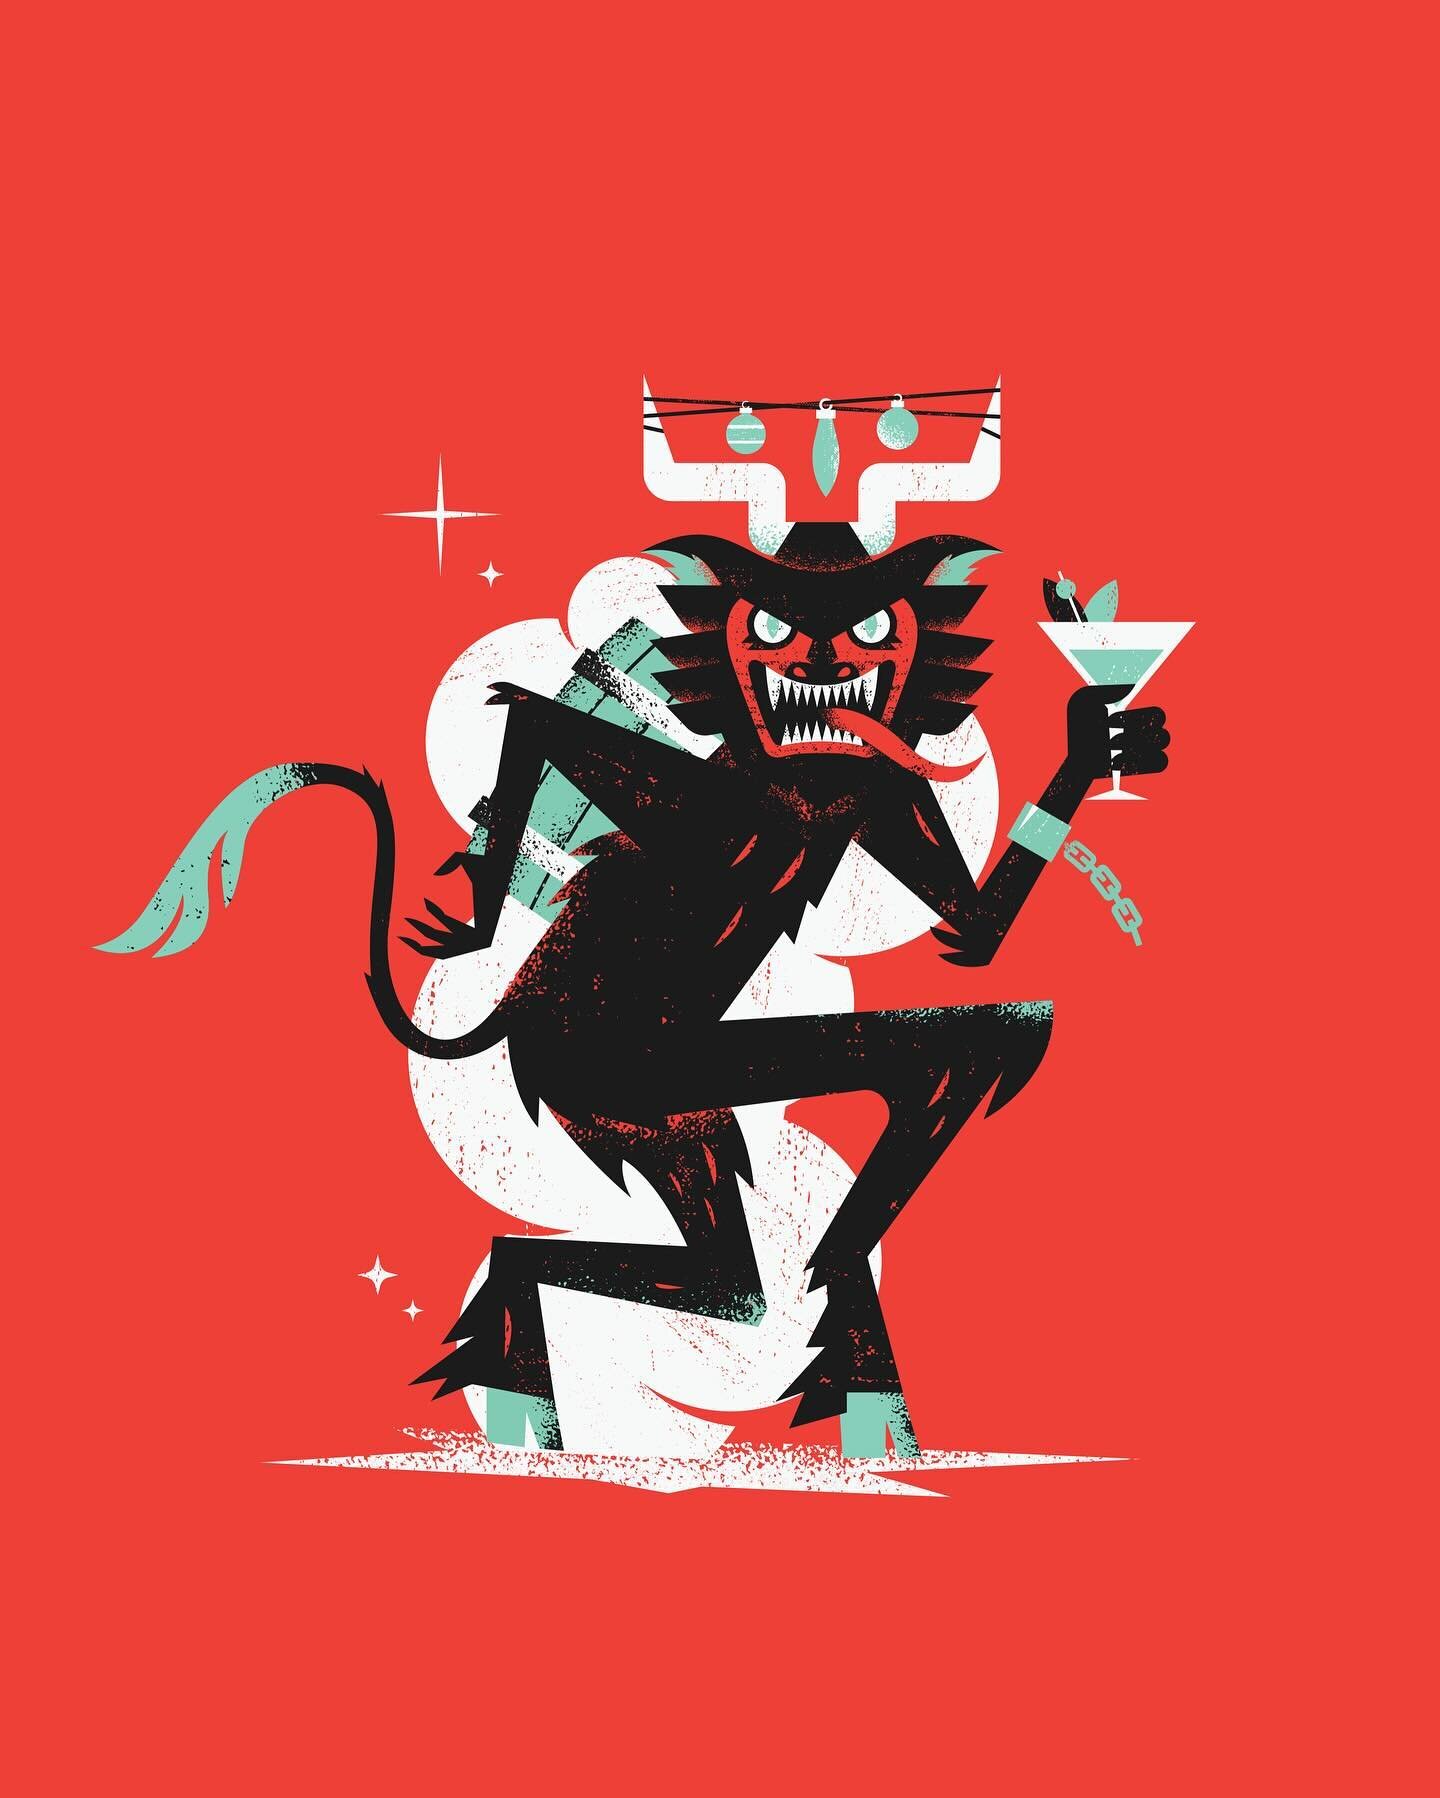 New work: a Christmas demon for the return of @loreleipgh&rsquo;s &ldquo;Krampus, Baby&rdquo; holiday cocktail menu! Swipe to see the poster &amp; menu designs, and swing by the bar to enjoy a festive drink and experience a little of that wonderful f